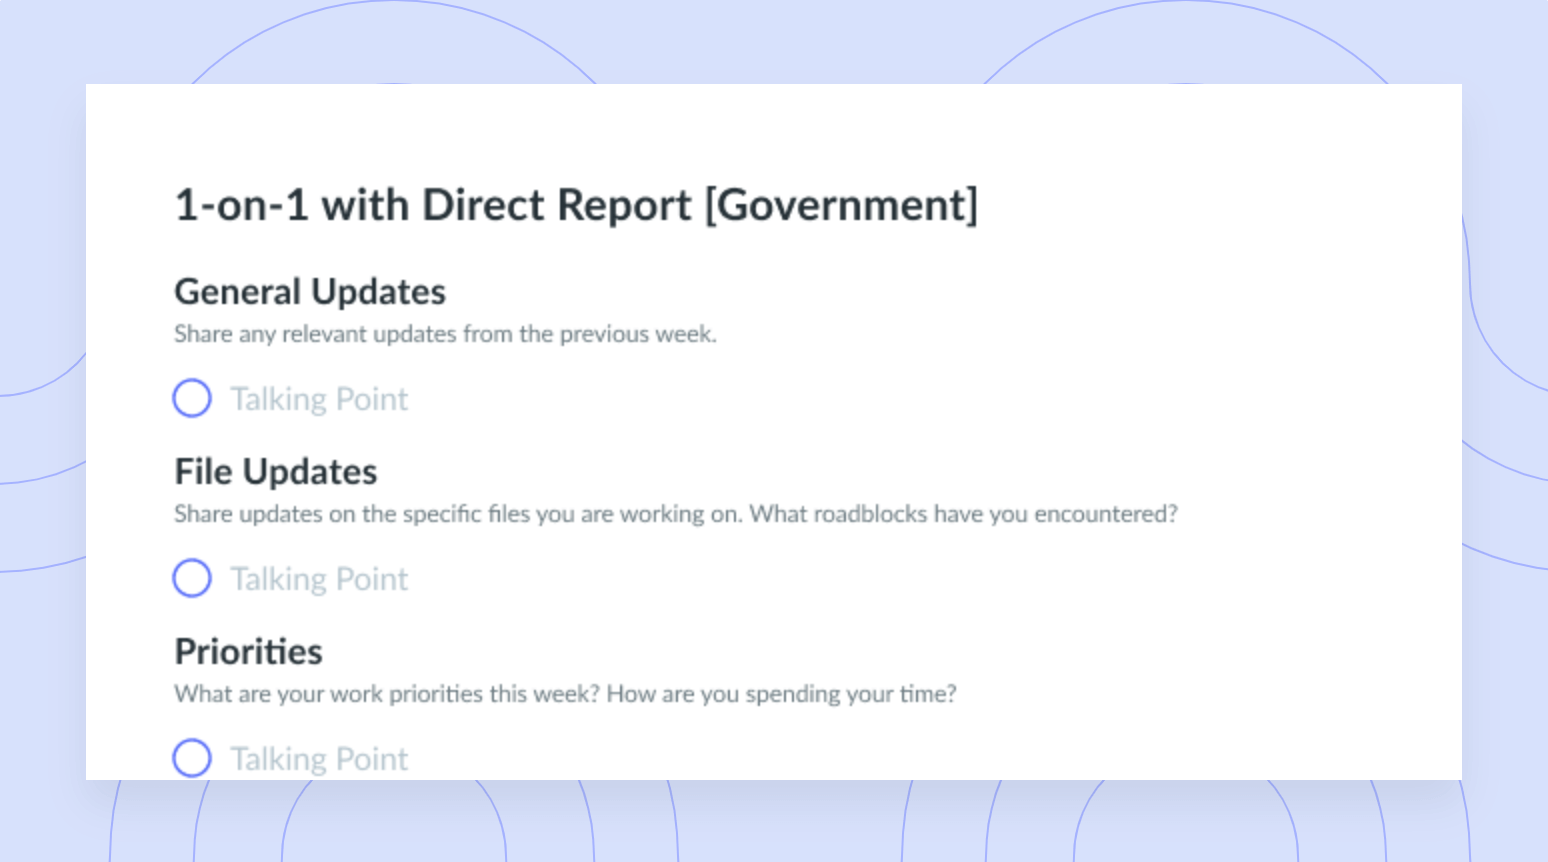 1-on-1 with Direct Report Meeting Template